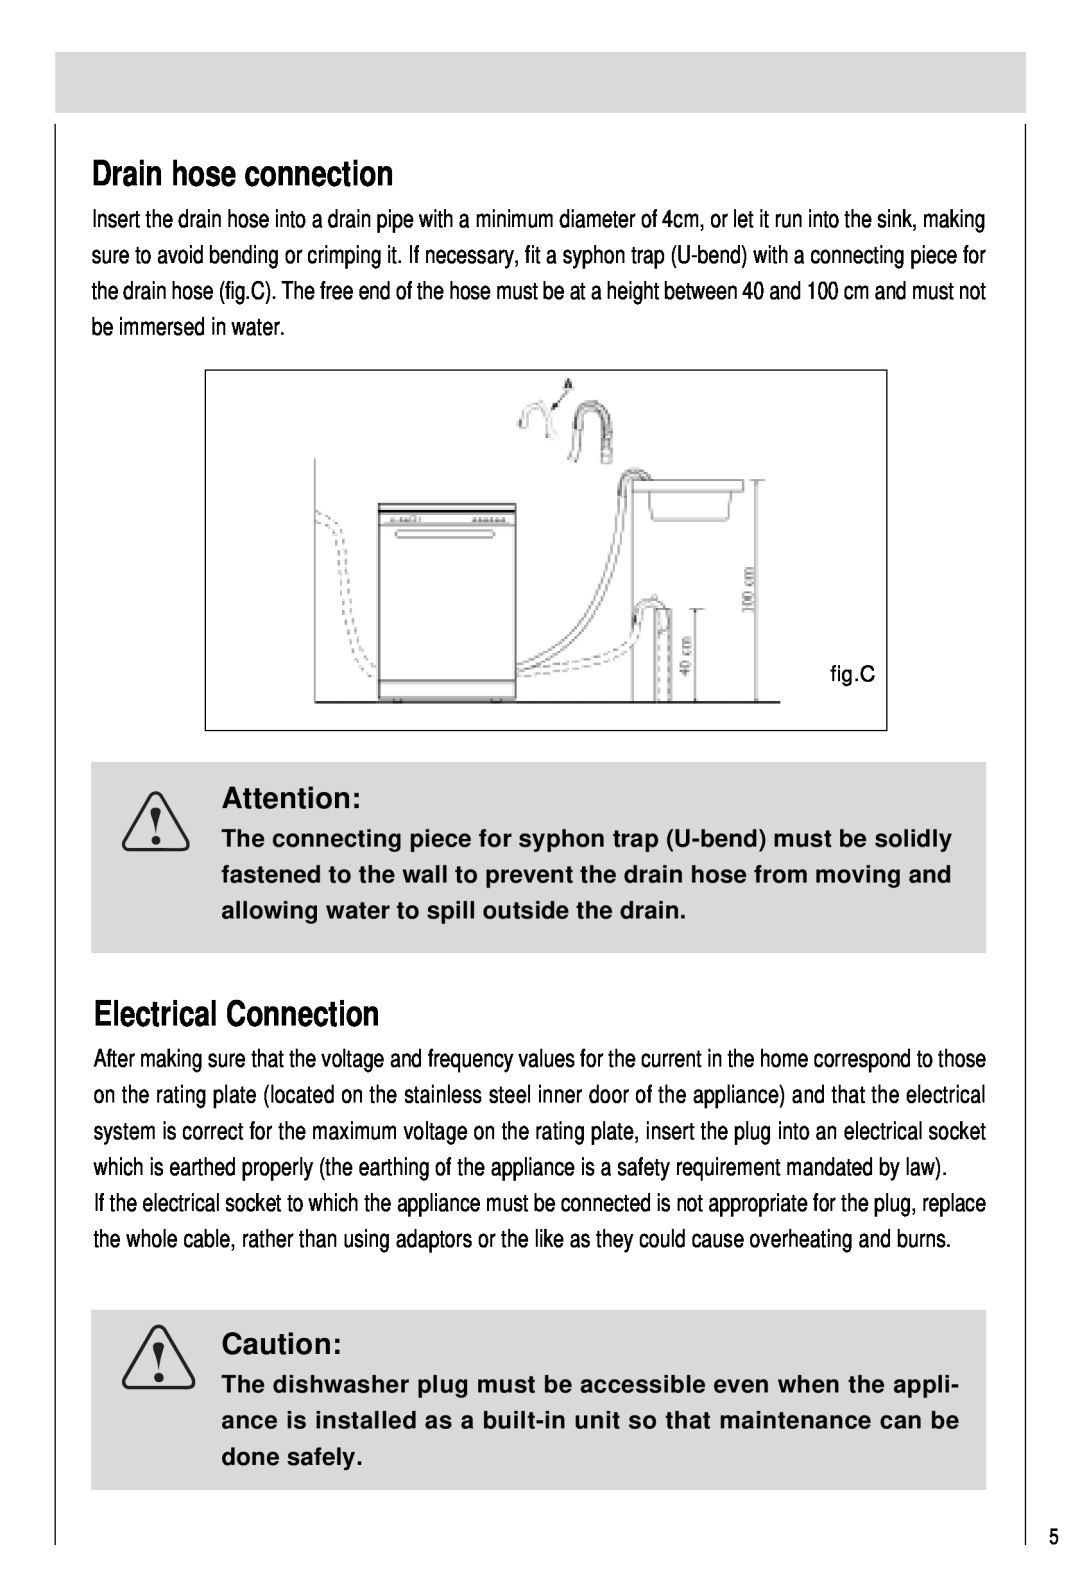 Haier DW15-PFE1, DW15-PFE2 manual Drain hose connection, Electrical Connection, fig.C 